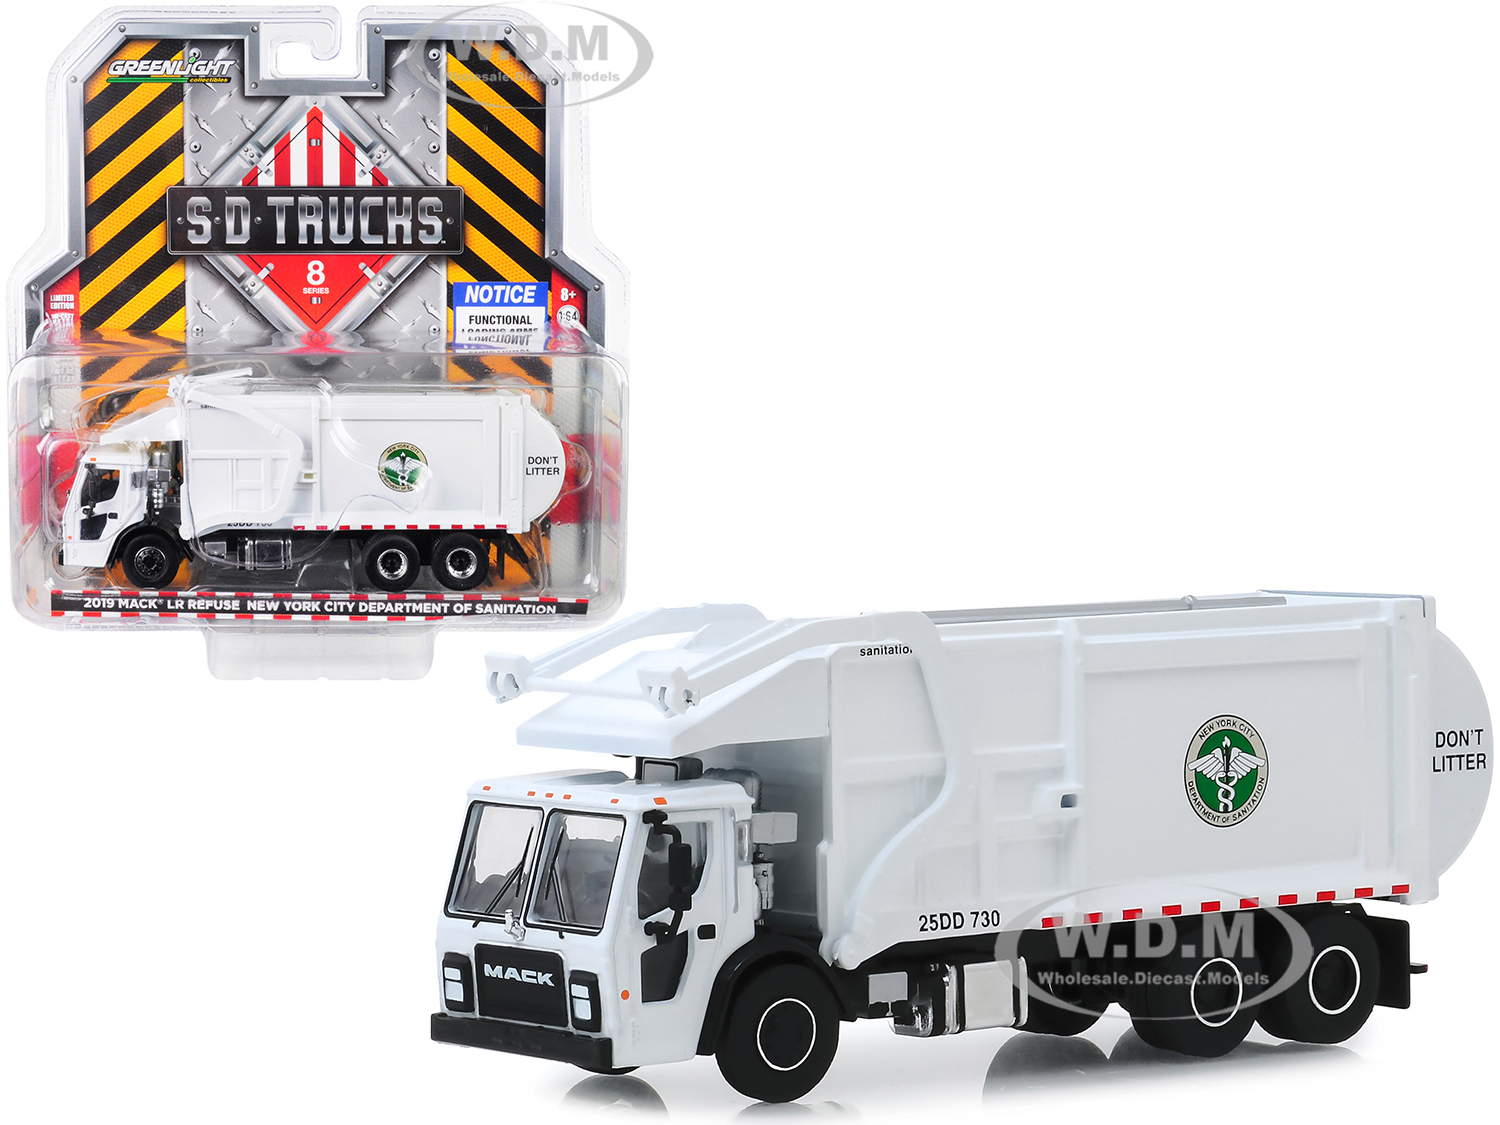 2019 Mack Lr Refuse And Recycle Garbage Truck White "dsny" (new York City Department Of Sanitation) "s.d. Trucks" Series 8 1/64 Diecast Model By Gree